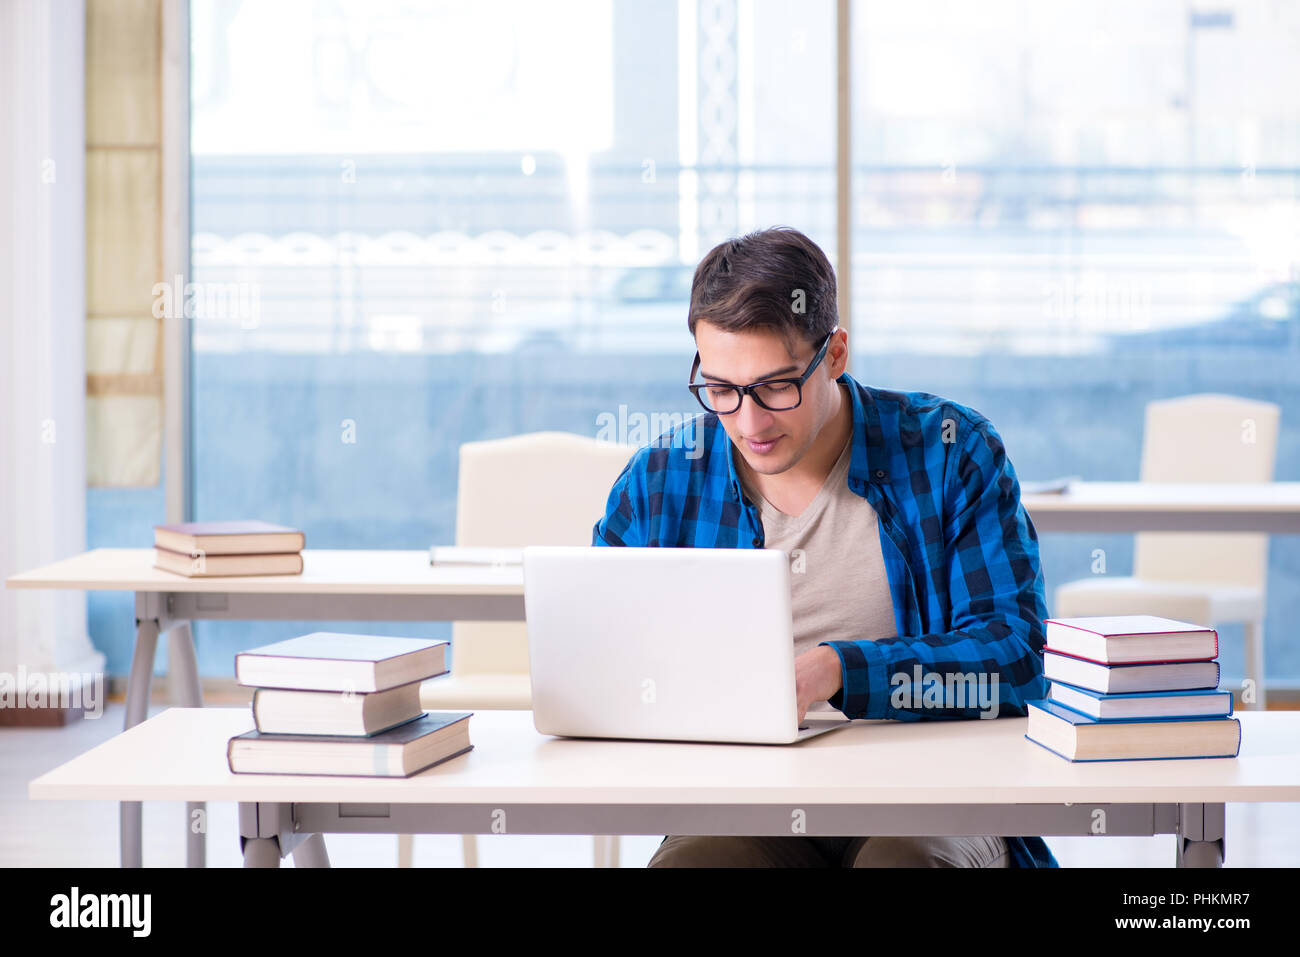 Student in telelearning distance learning concept reading in lib Stock Photo